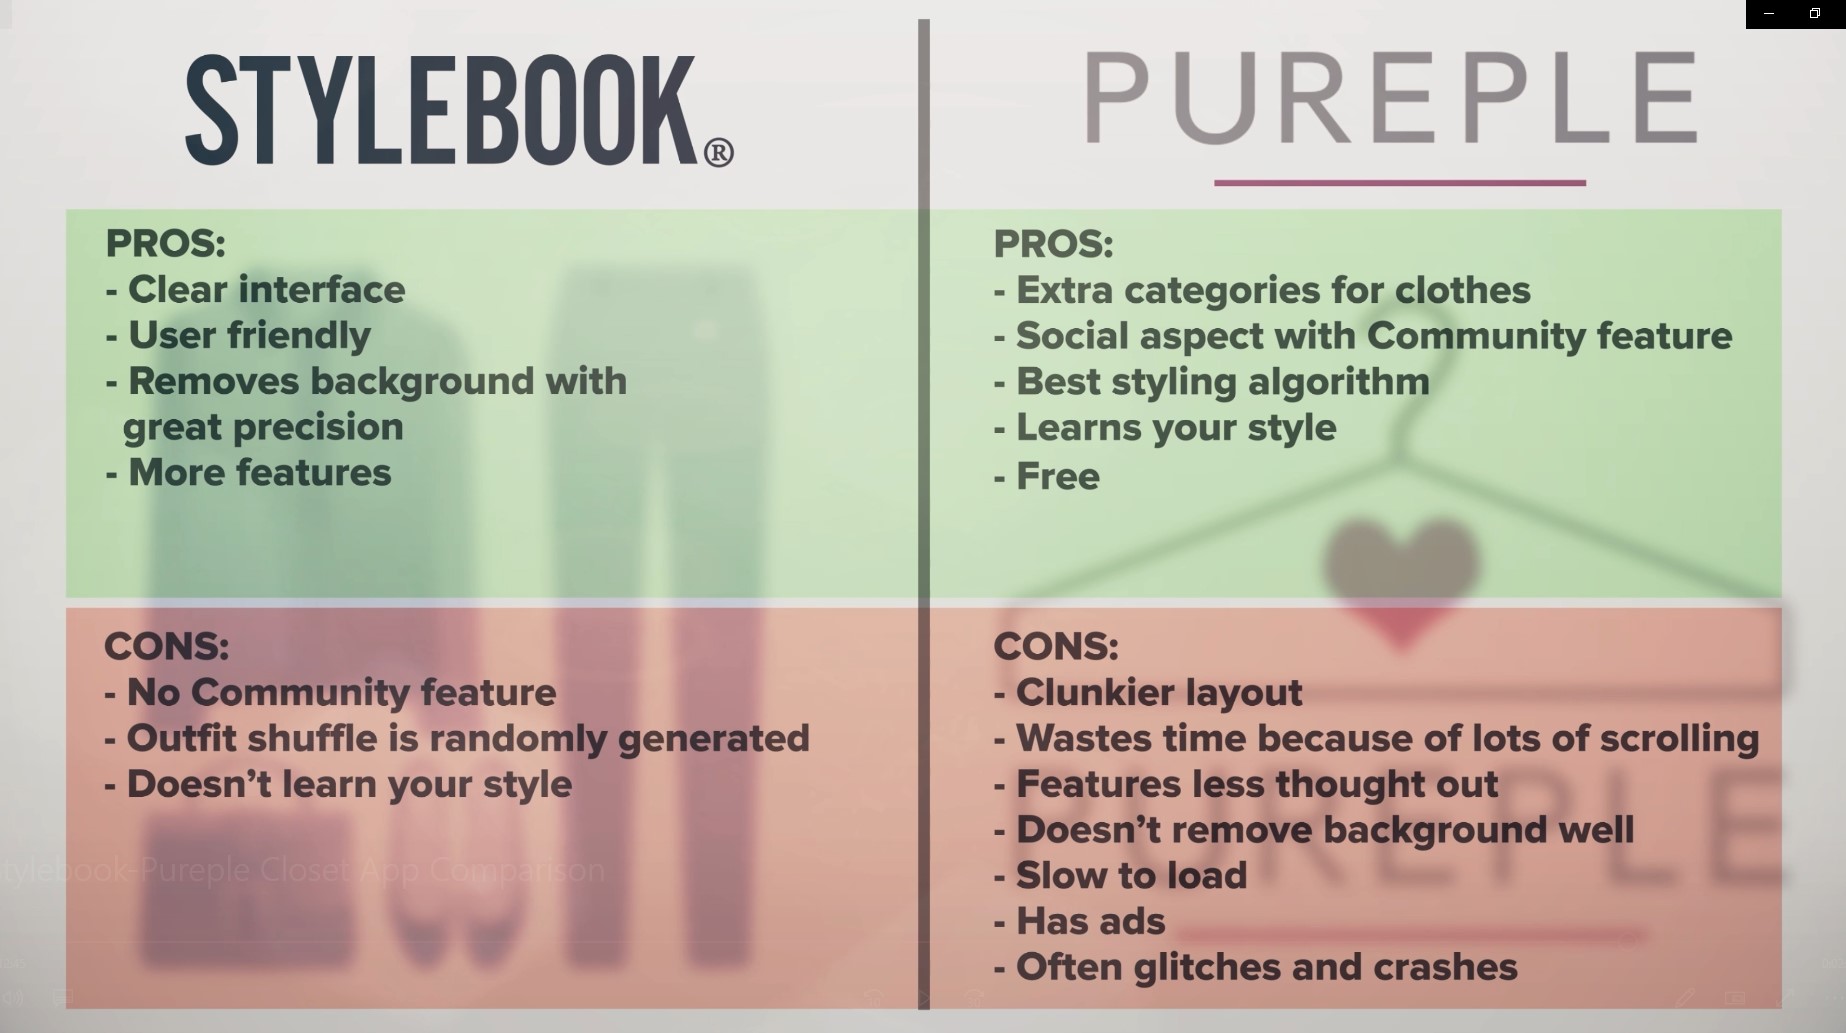 Stylebook Vs Pureple Pros and Cons